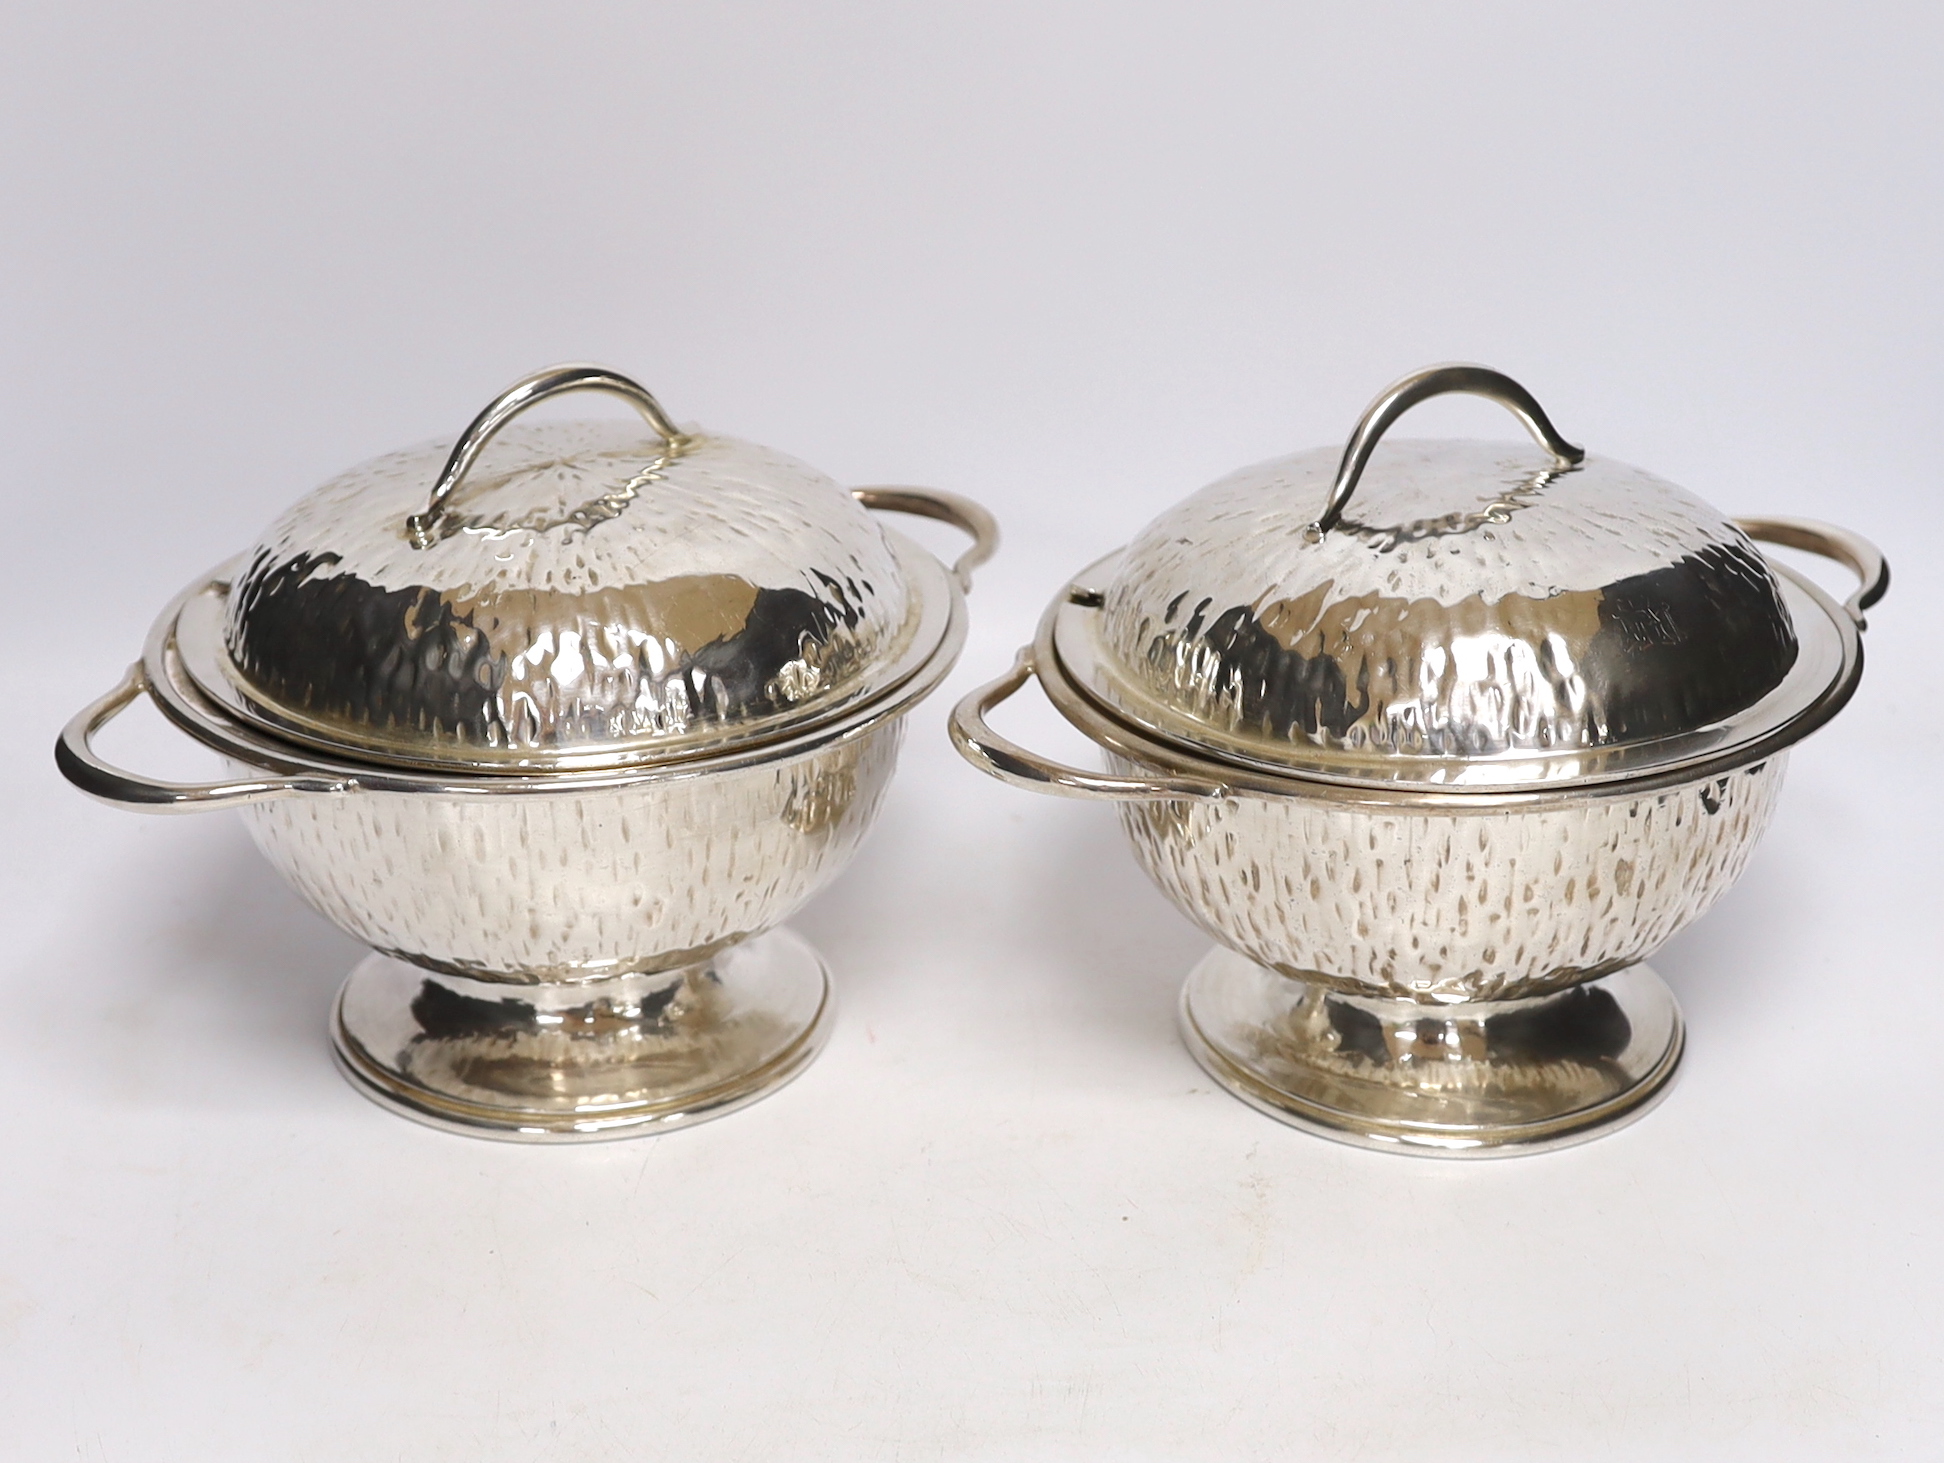 A pair of Hukin & Heath plated tureens and covers, attributed to Christopher Dresser, stamp to the bases, 27cm wide